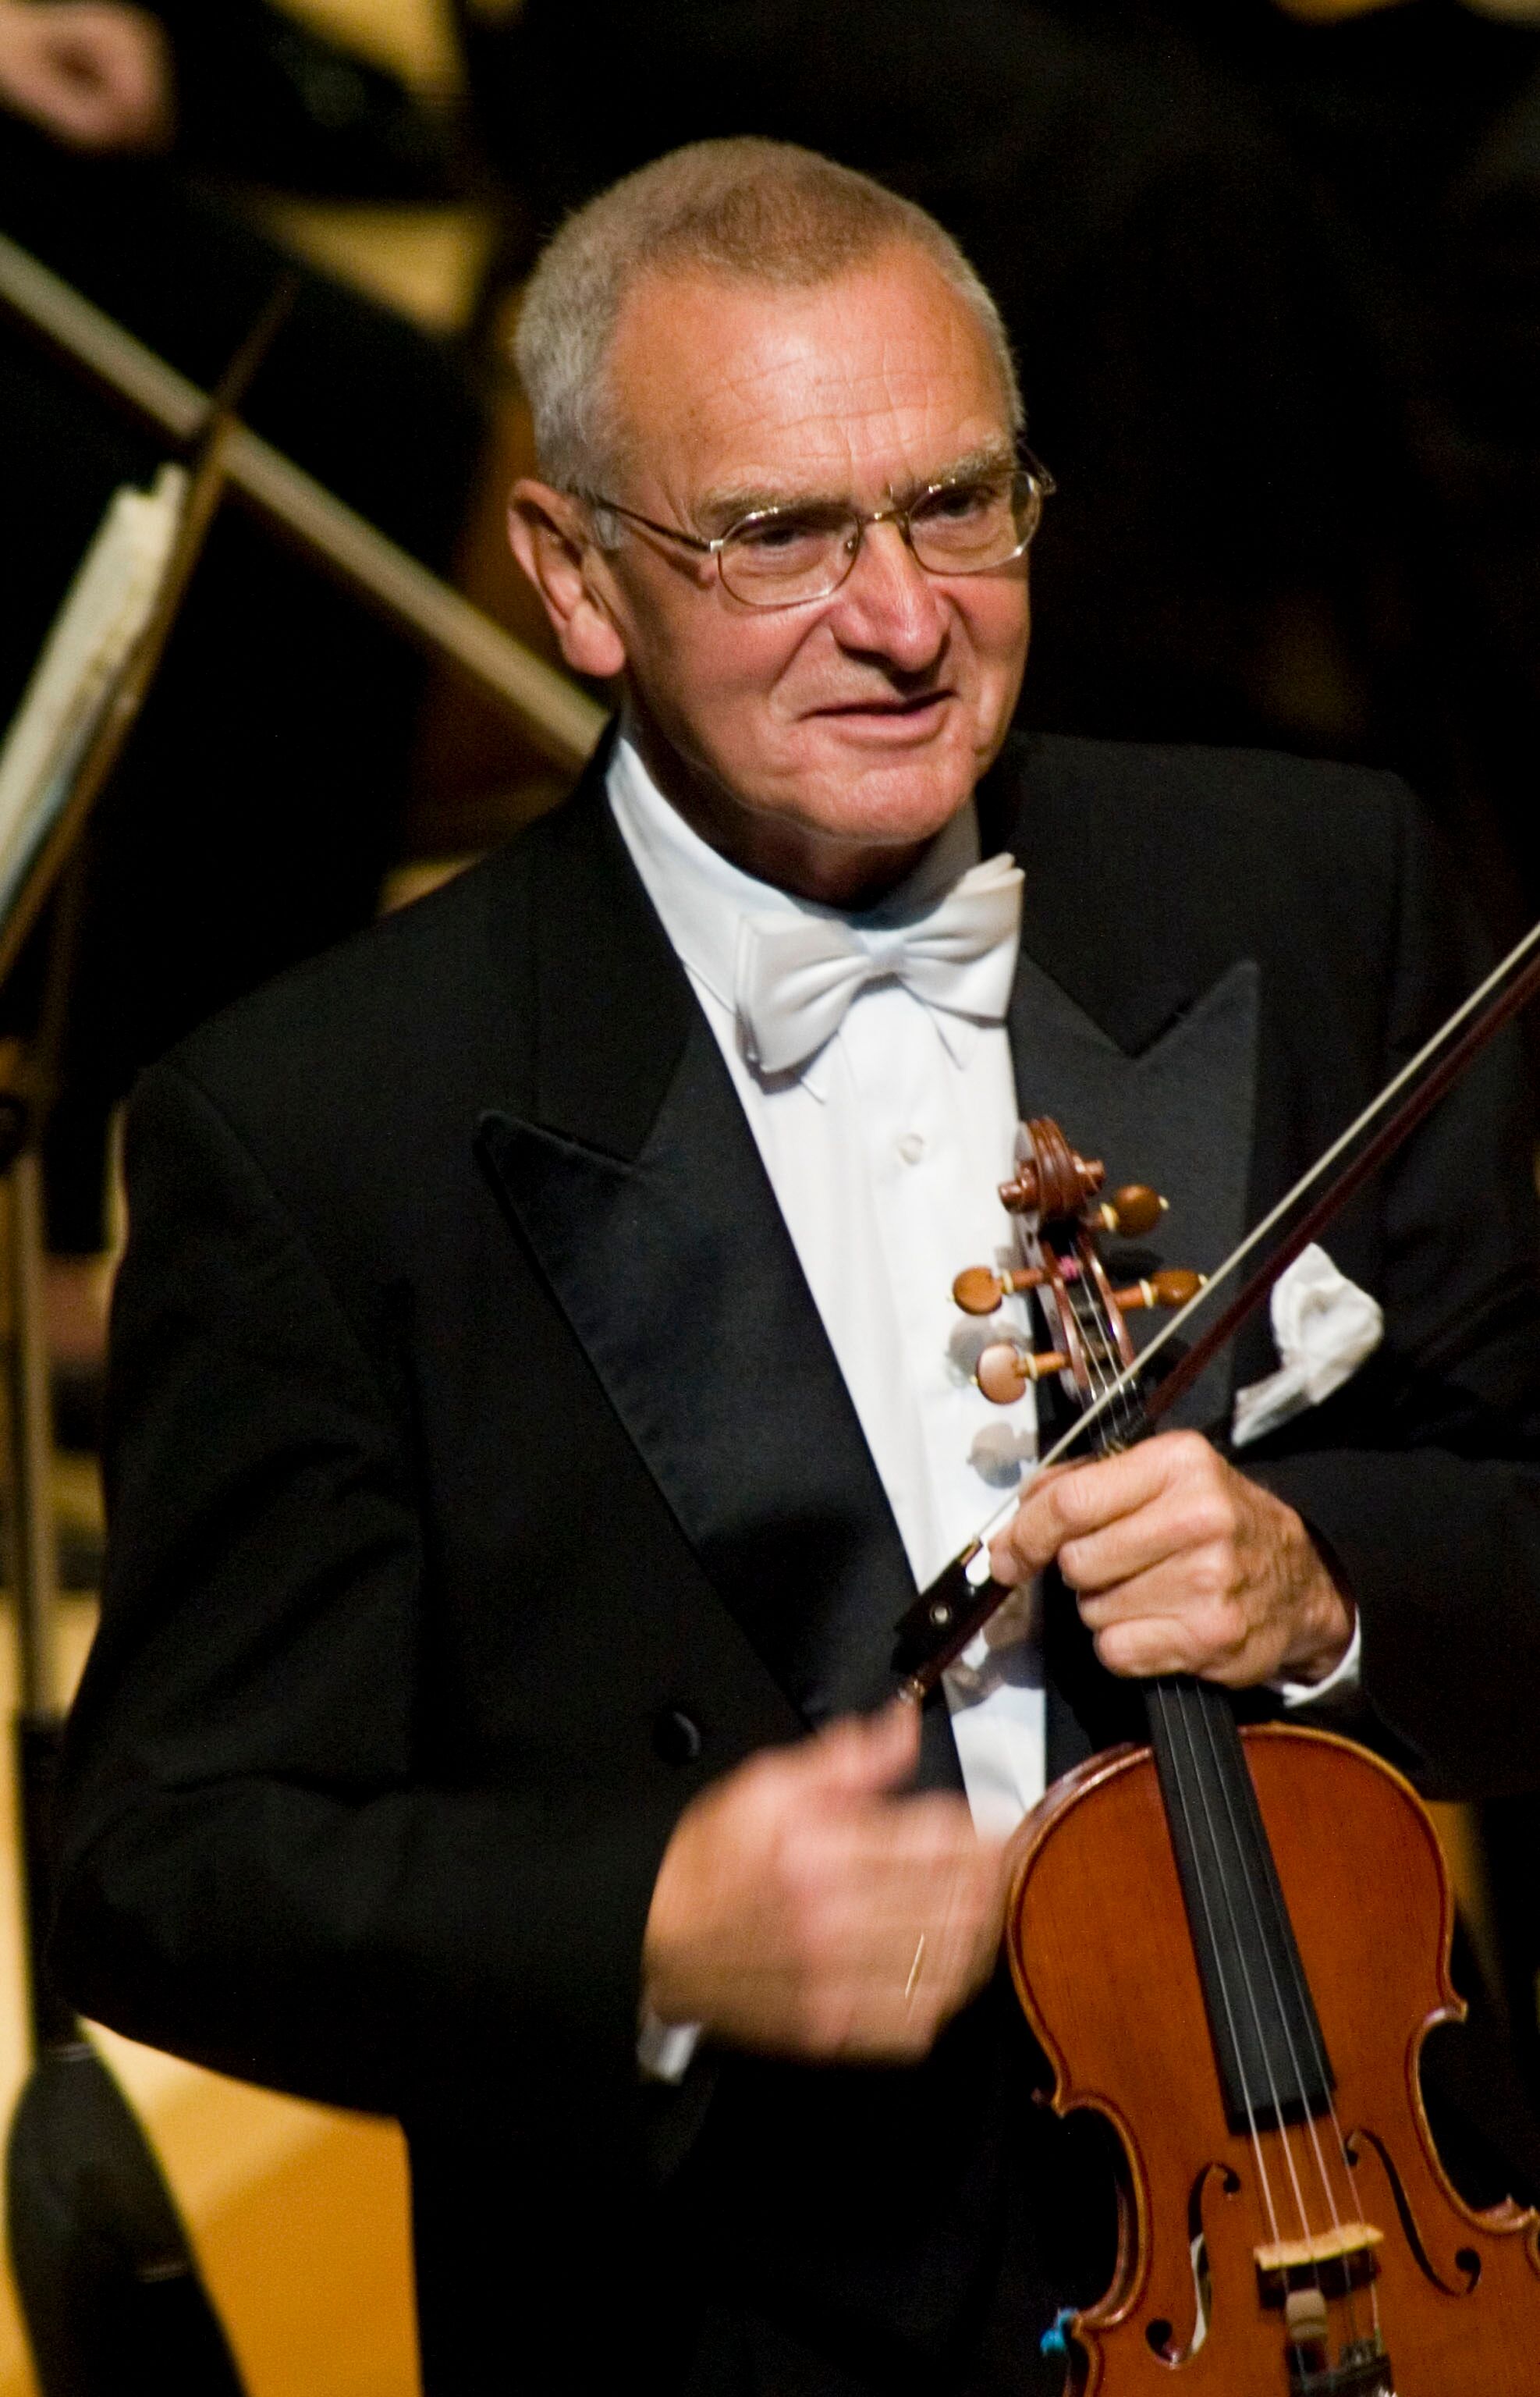 Death of a roaming concertmaster, 77